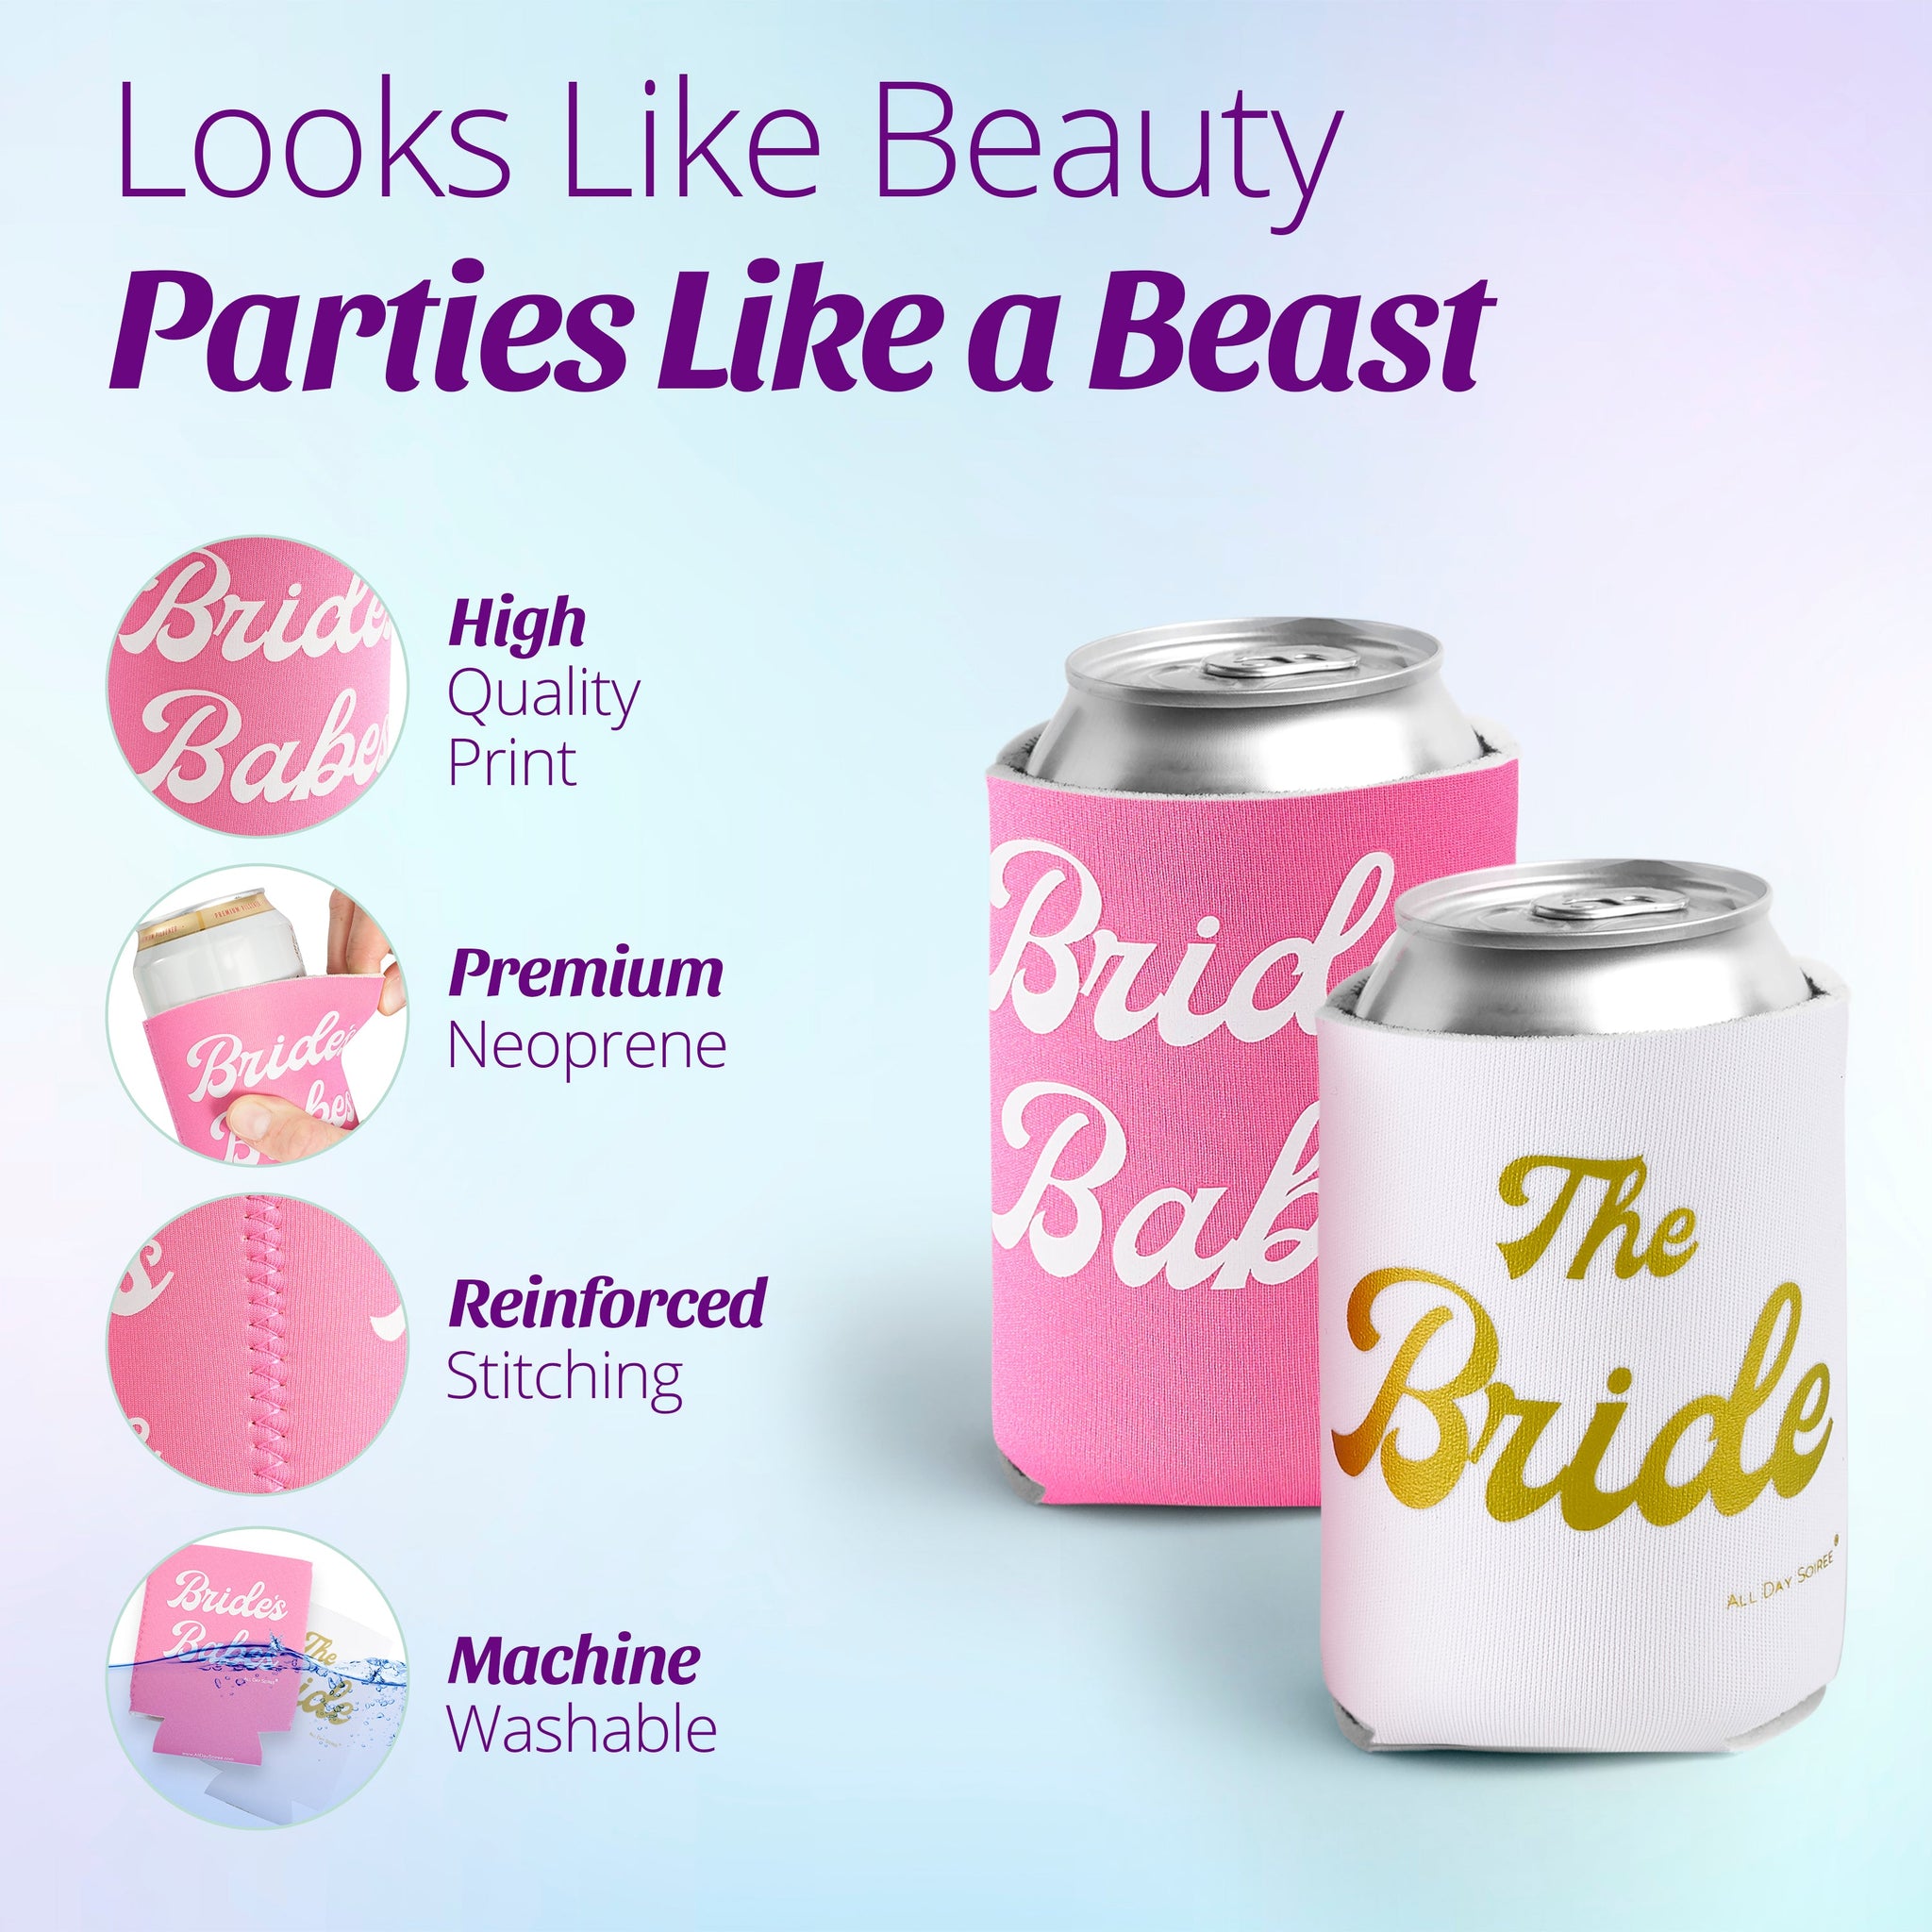 Beer Coozies : Trashy Girl Collapsible Coolie Set